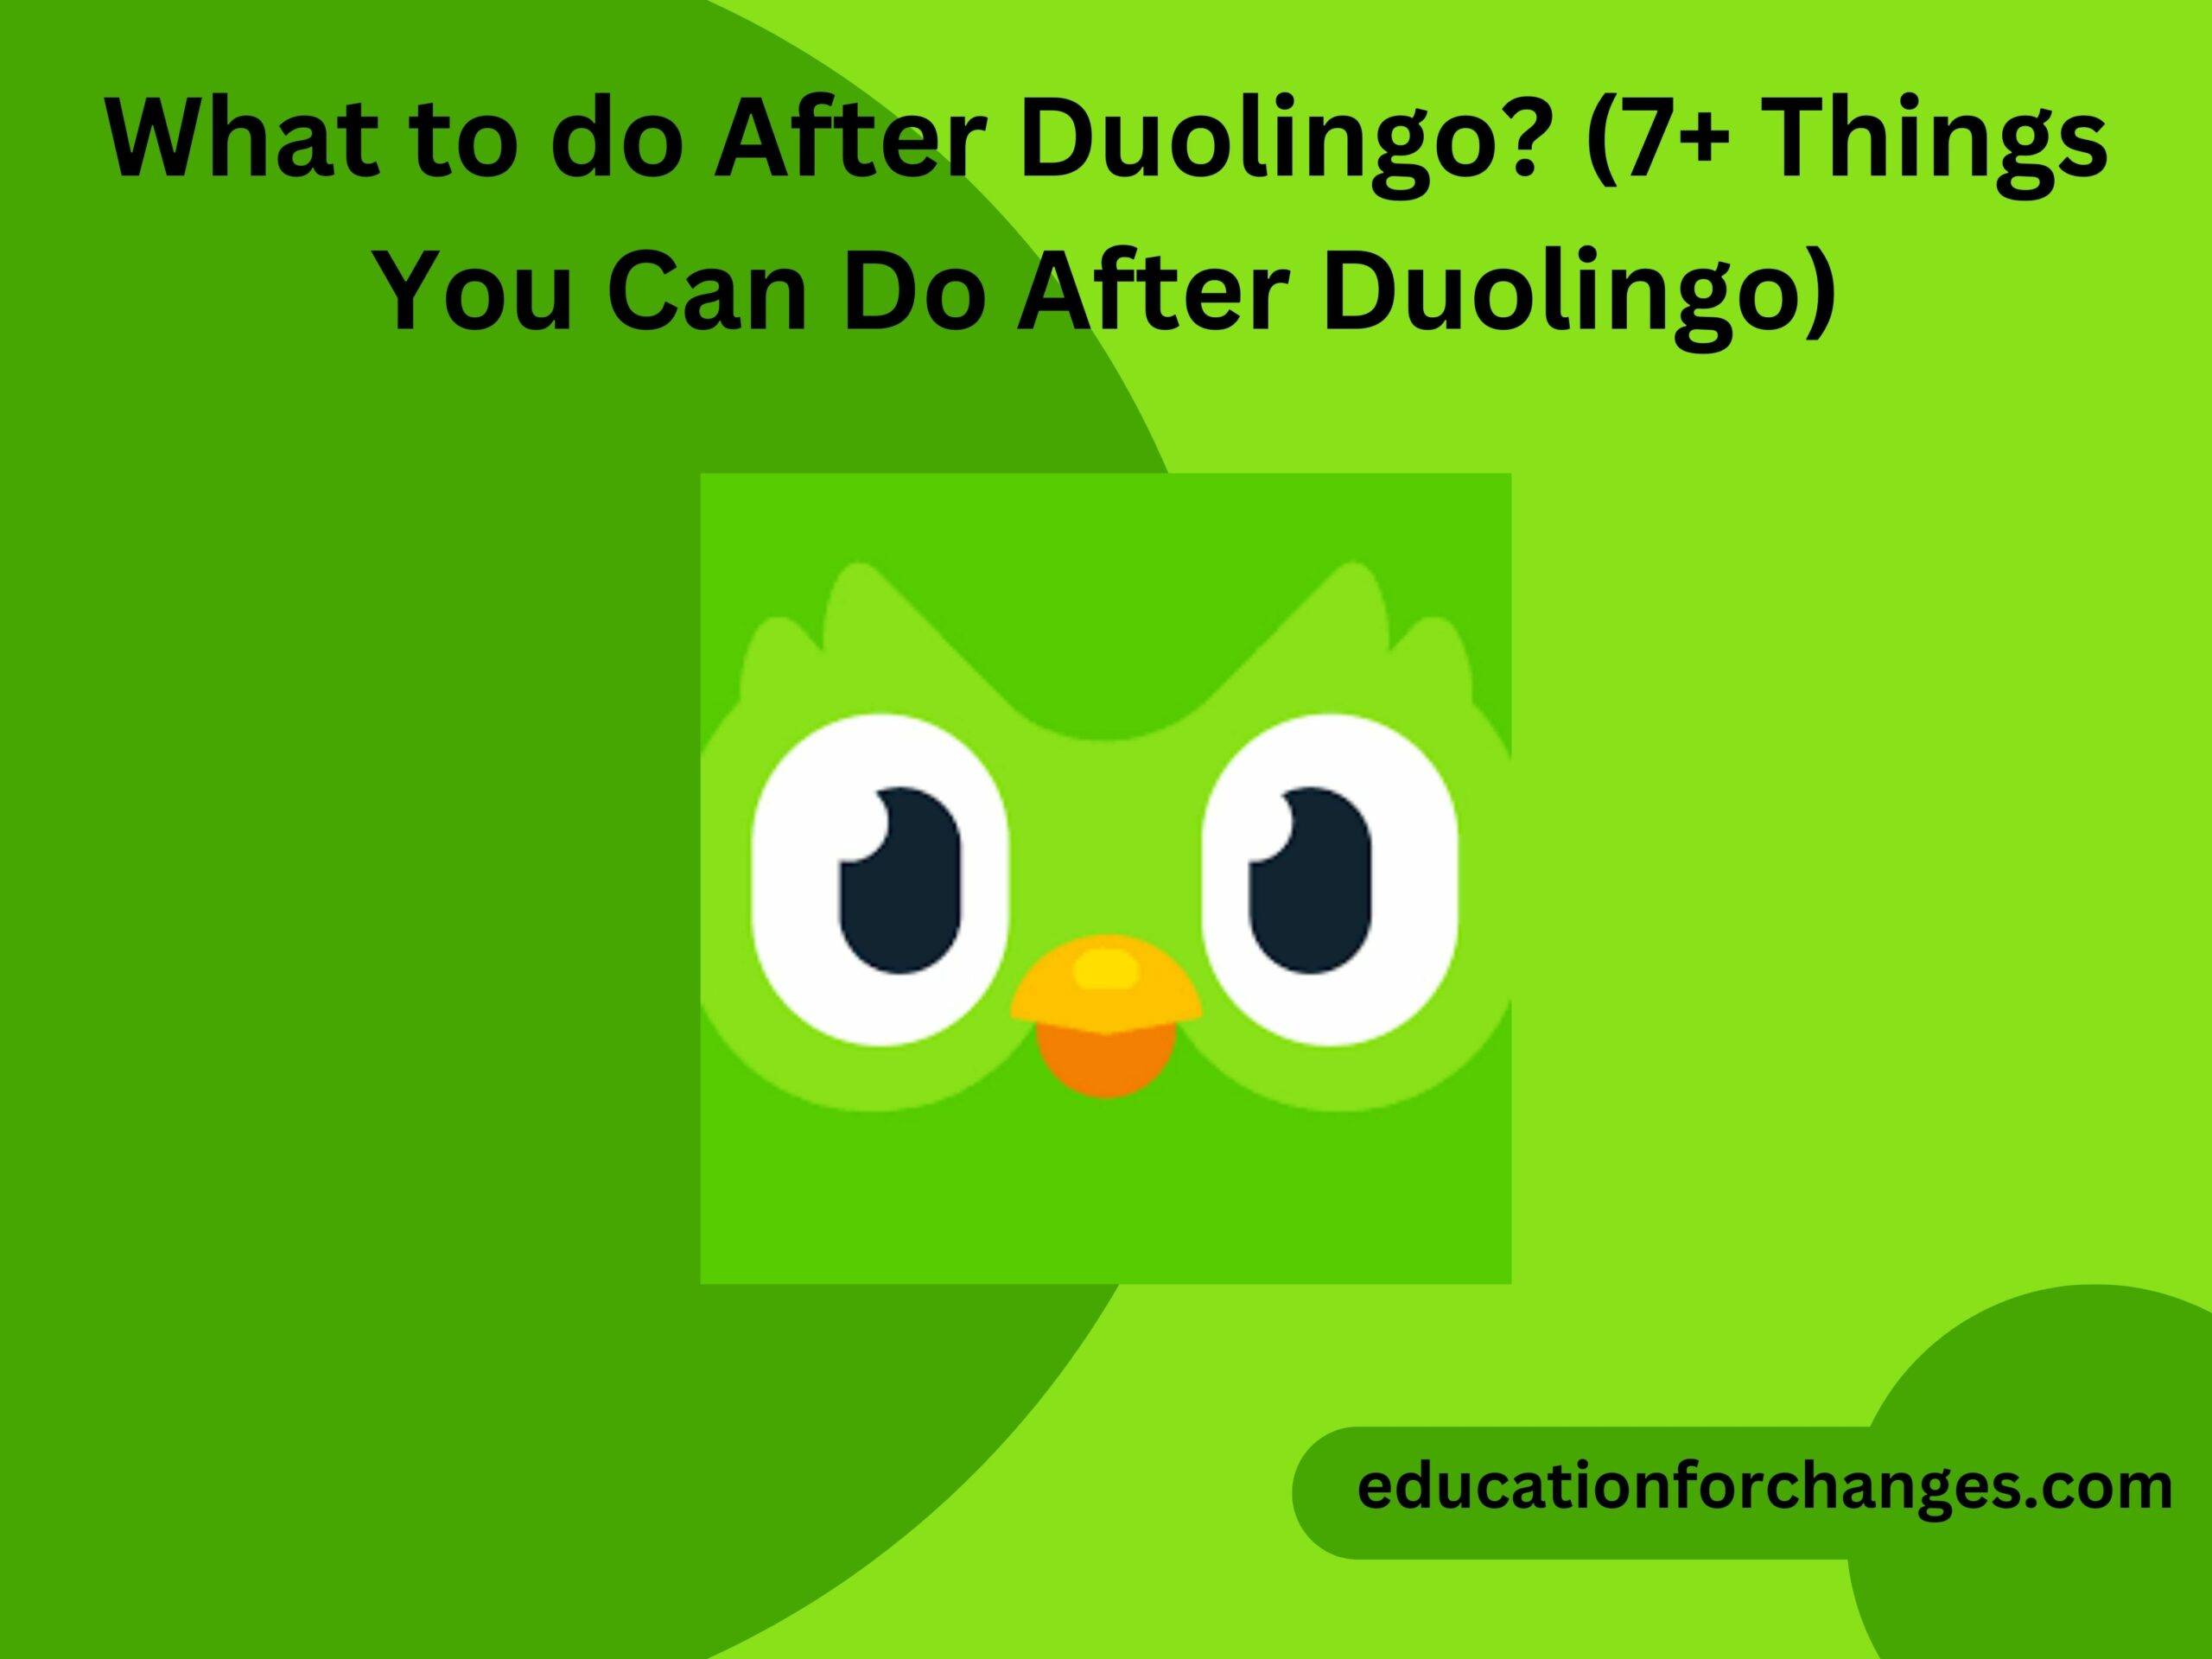 What to do After Duolingo? (7+ Things You Can Do After Duolingo)